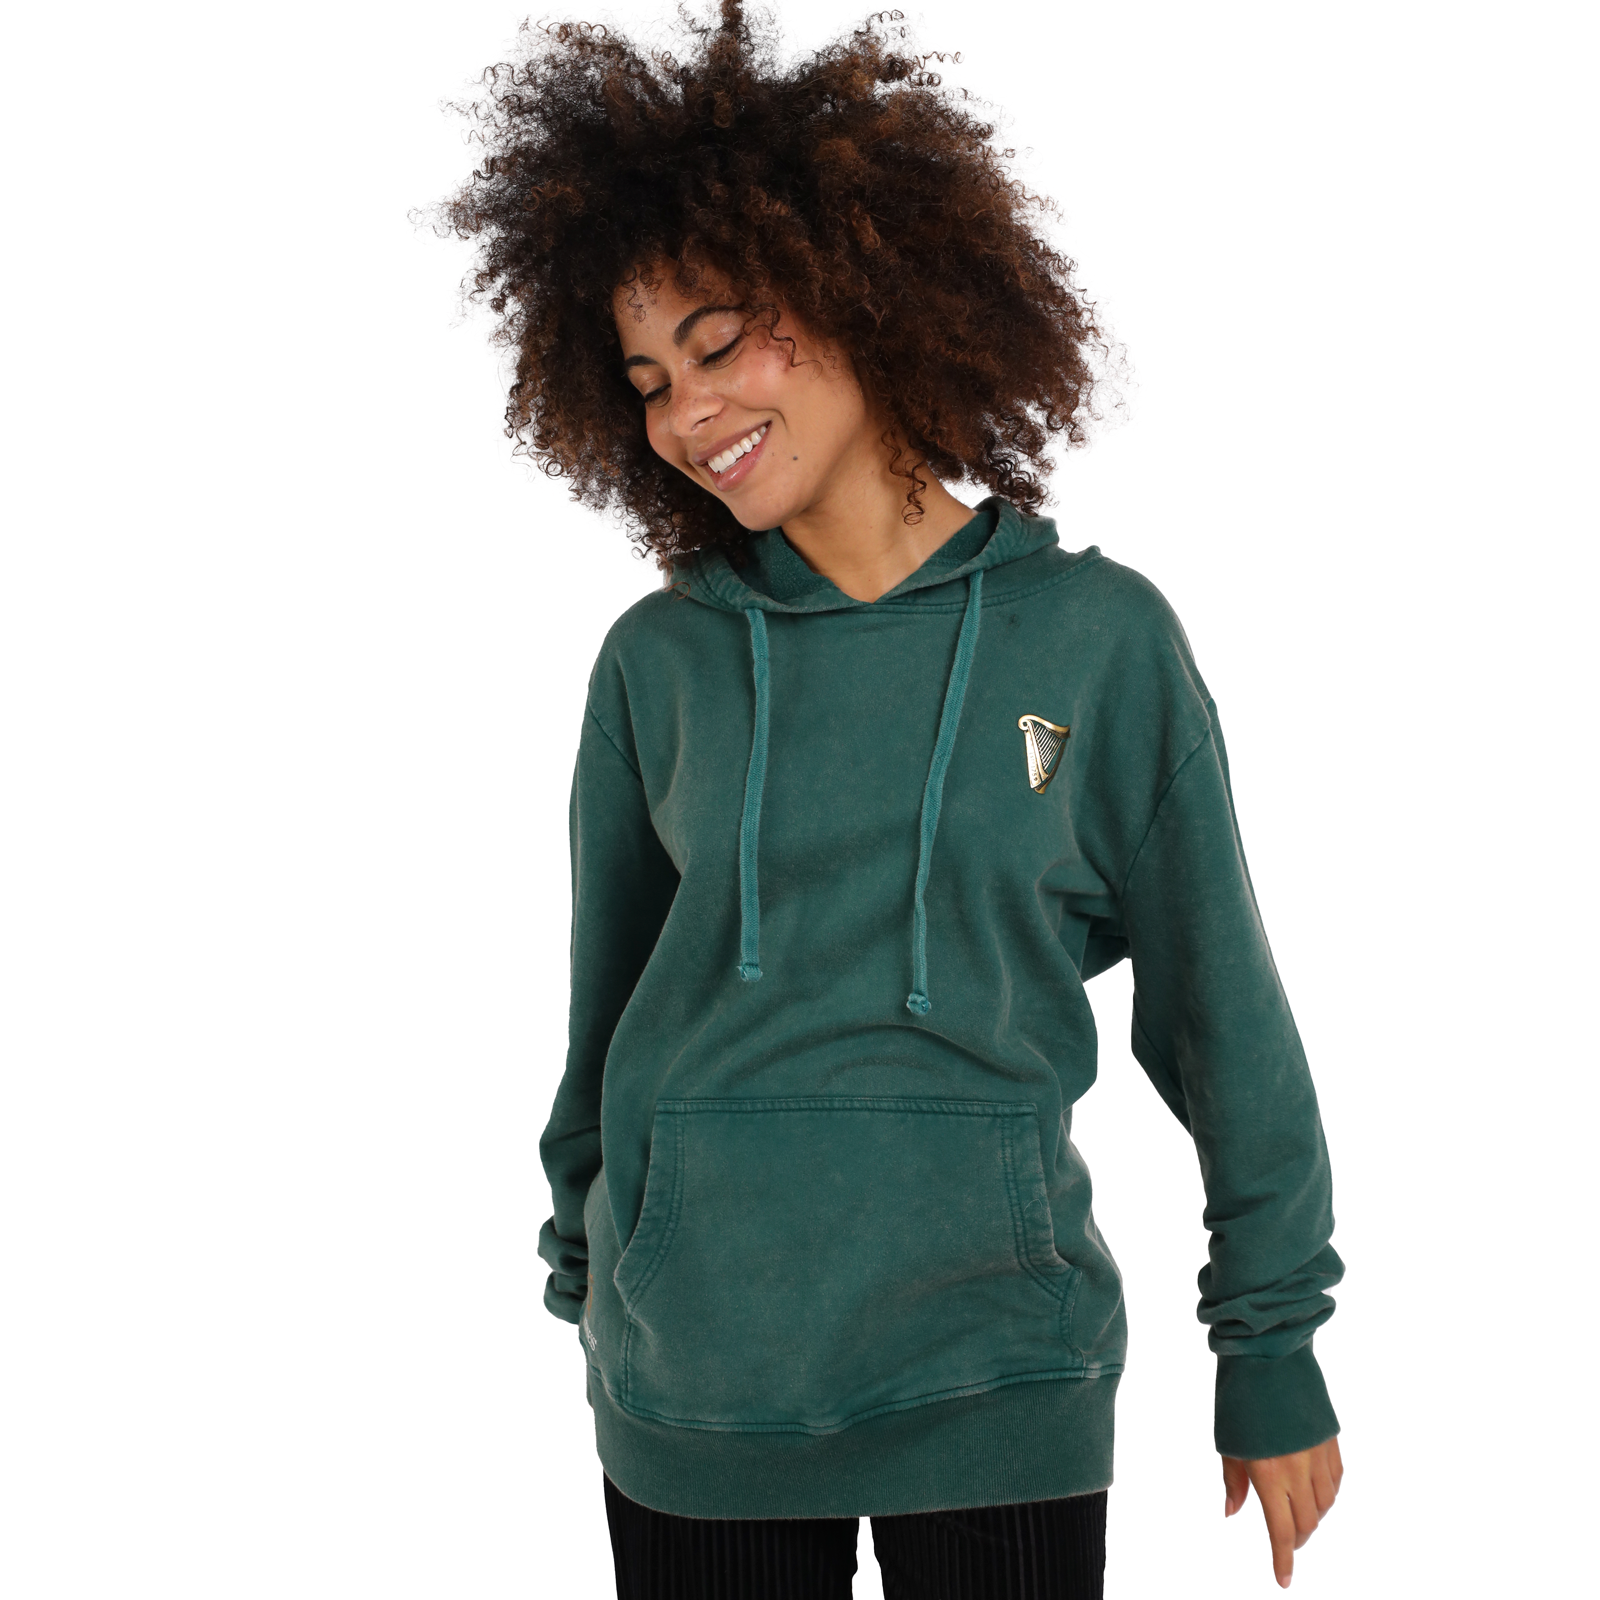  Day Trading - Stock Trader - Stock Market - Investor Zip Hoodie  : Clothing, Shoes & Jewelry